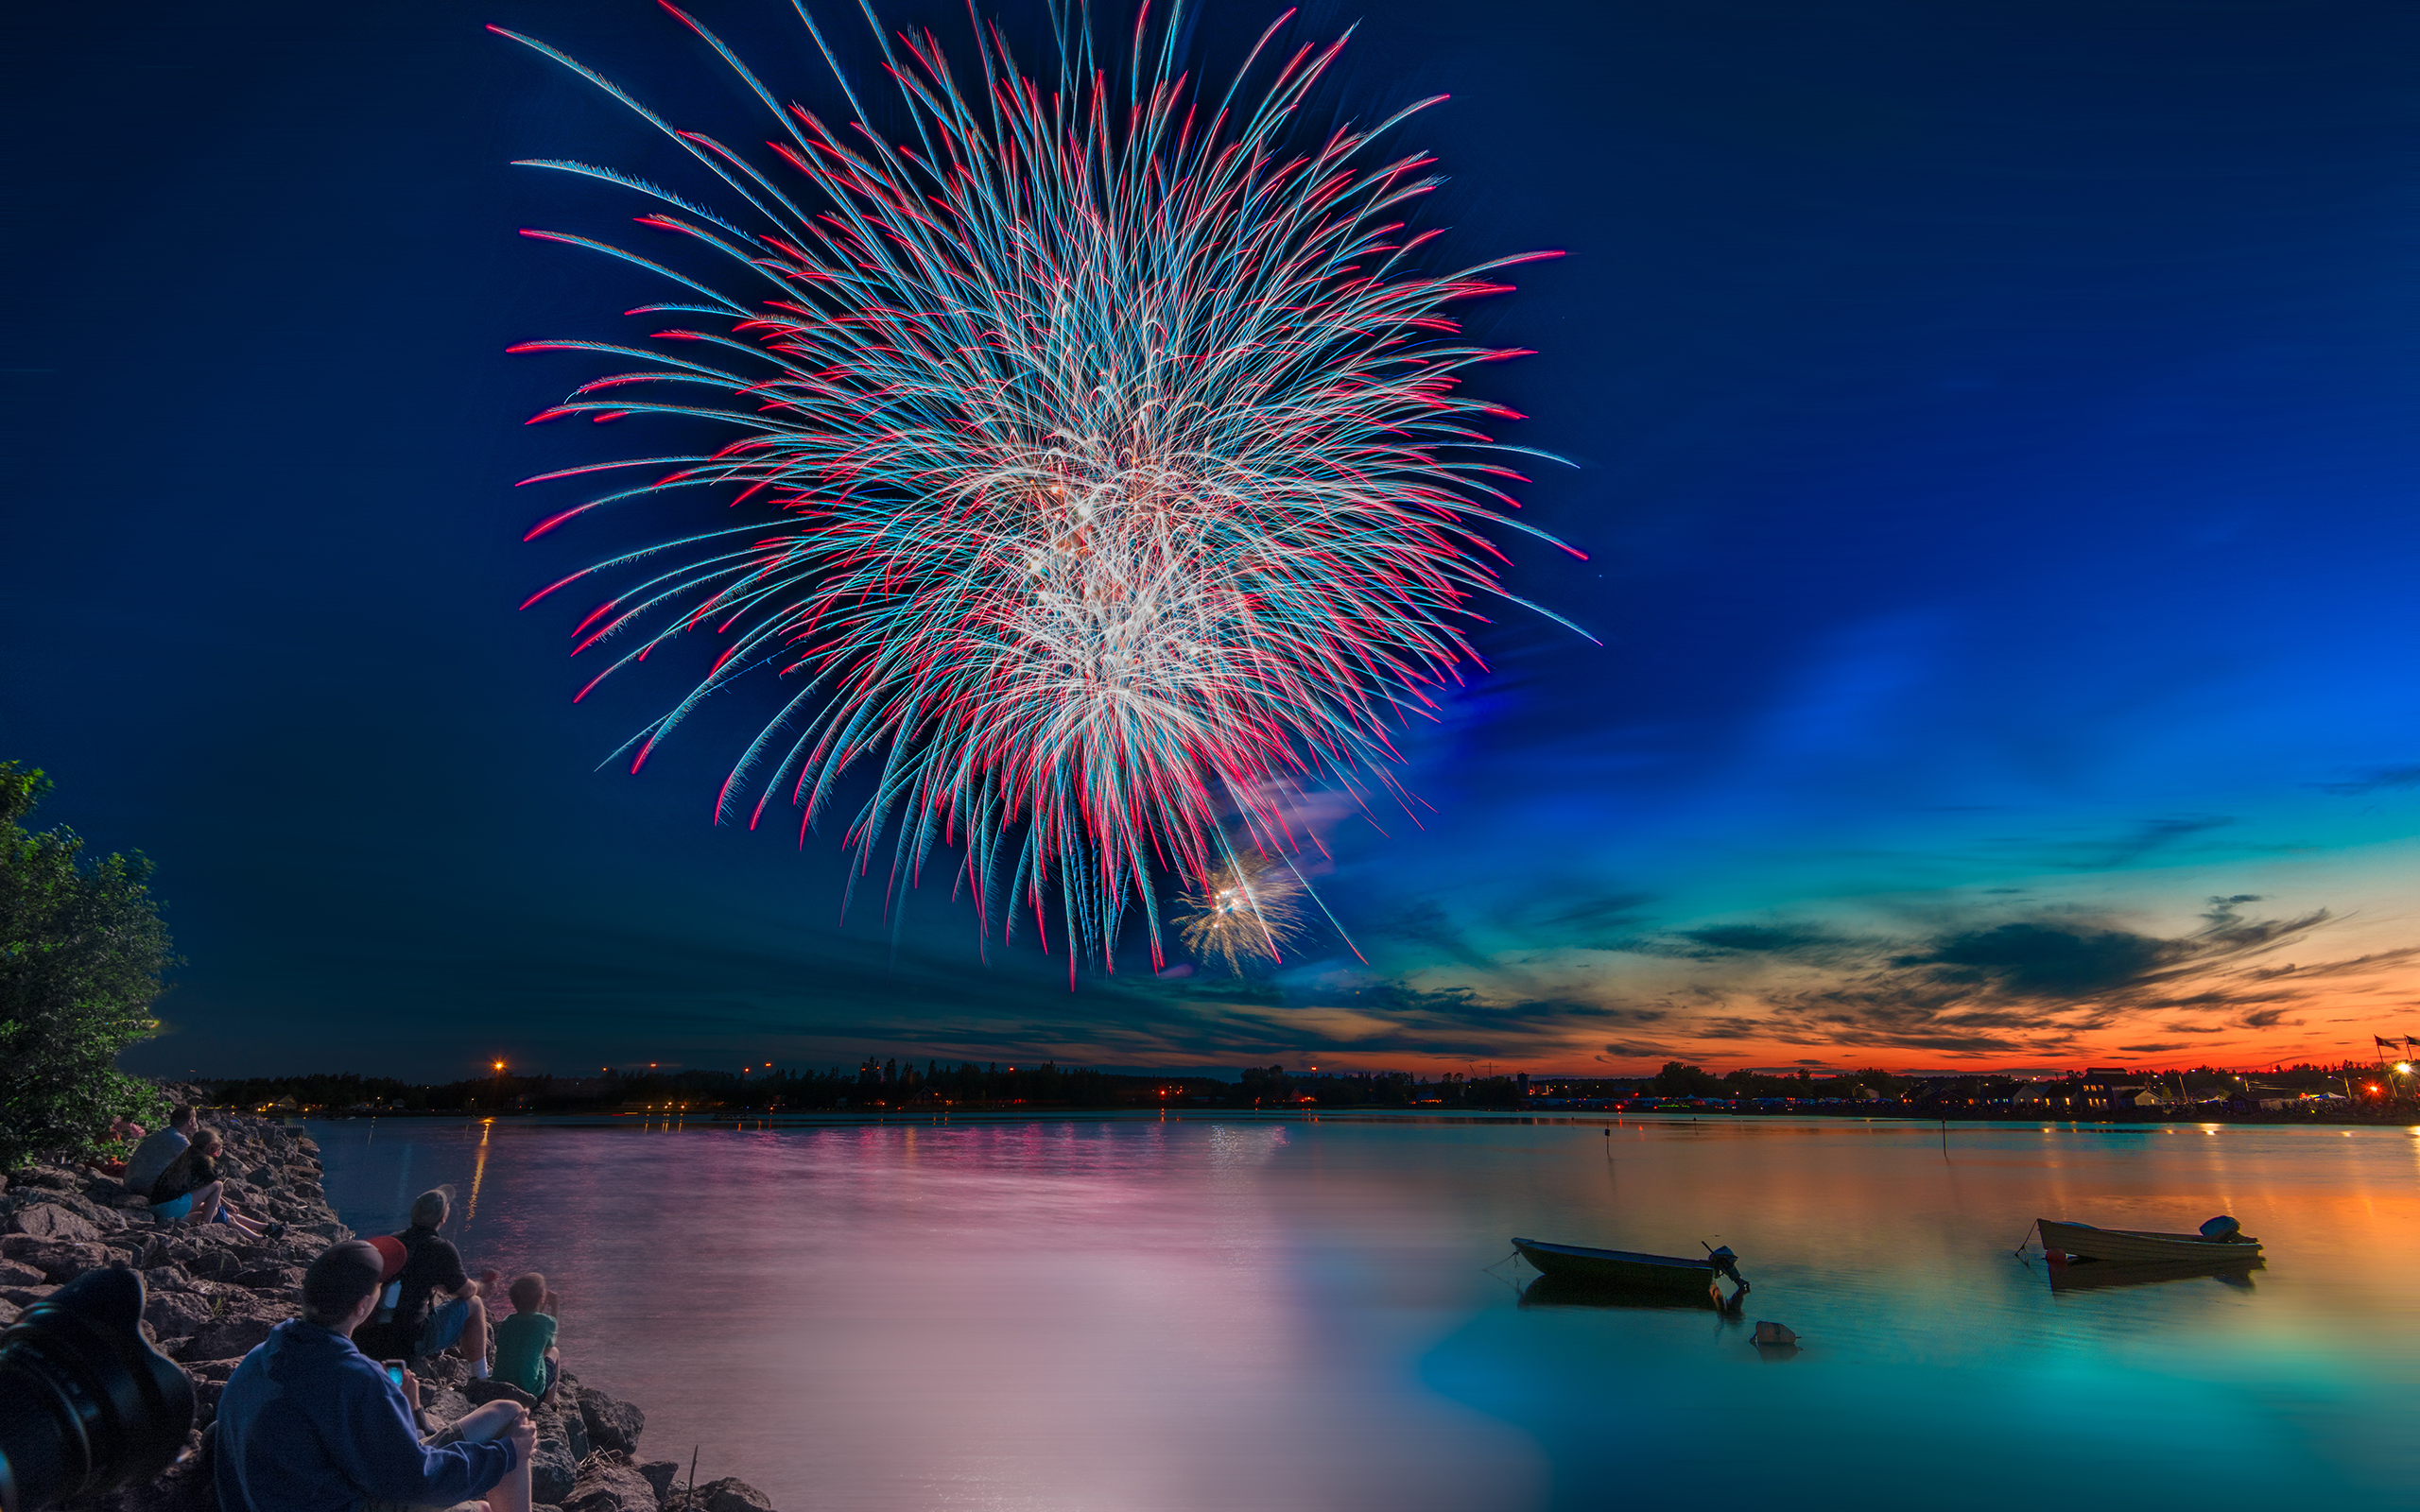 Fireworks Over A Lake - HD Wallpaper 